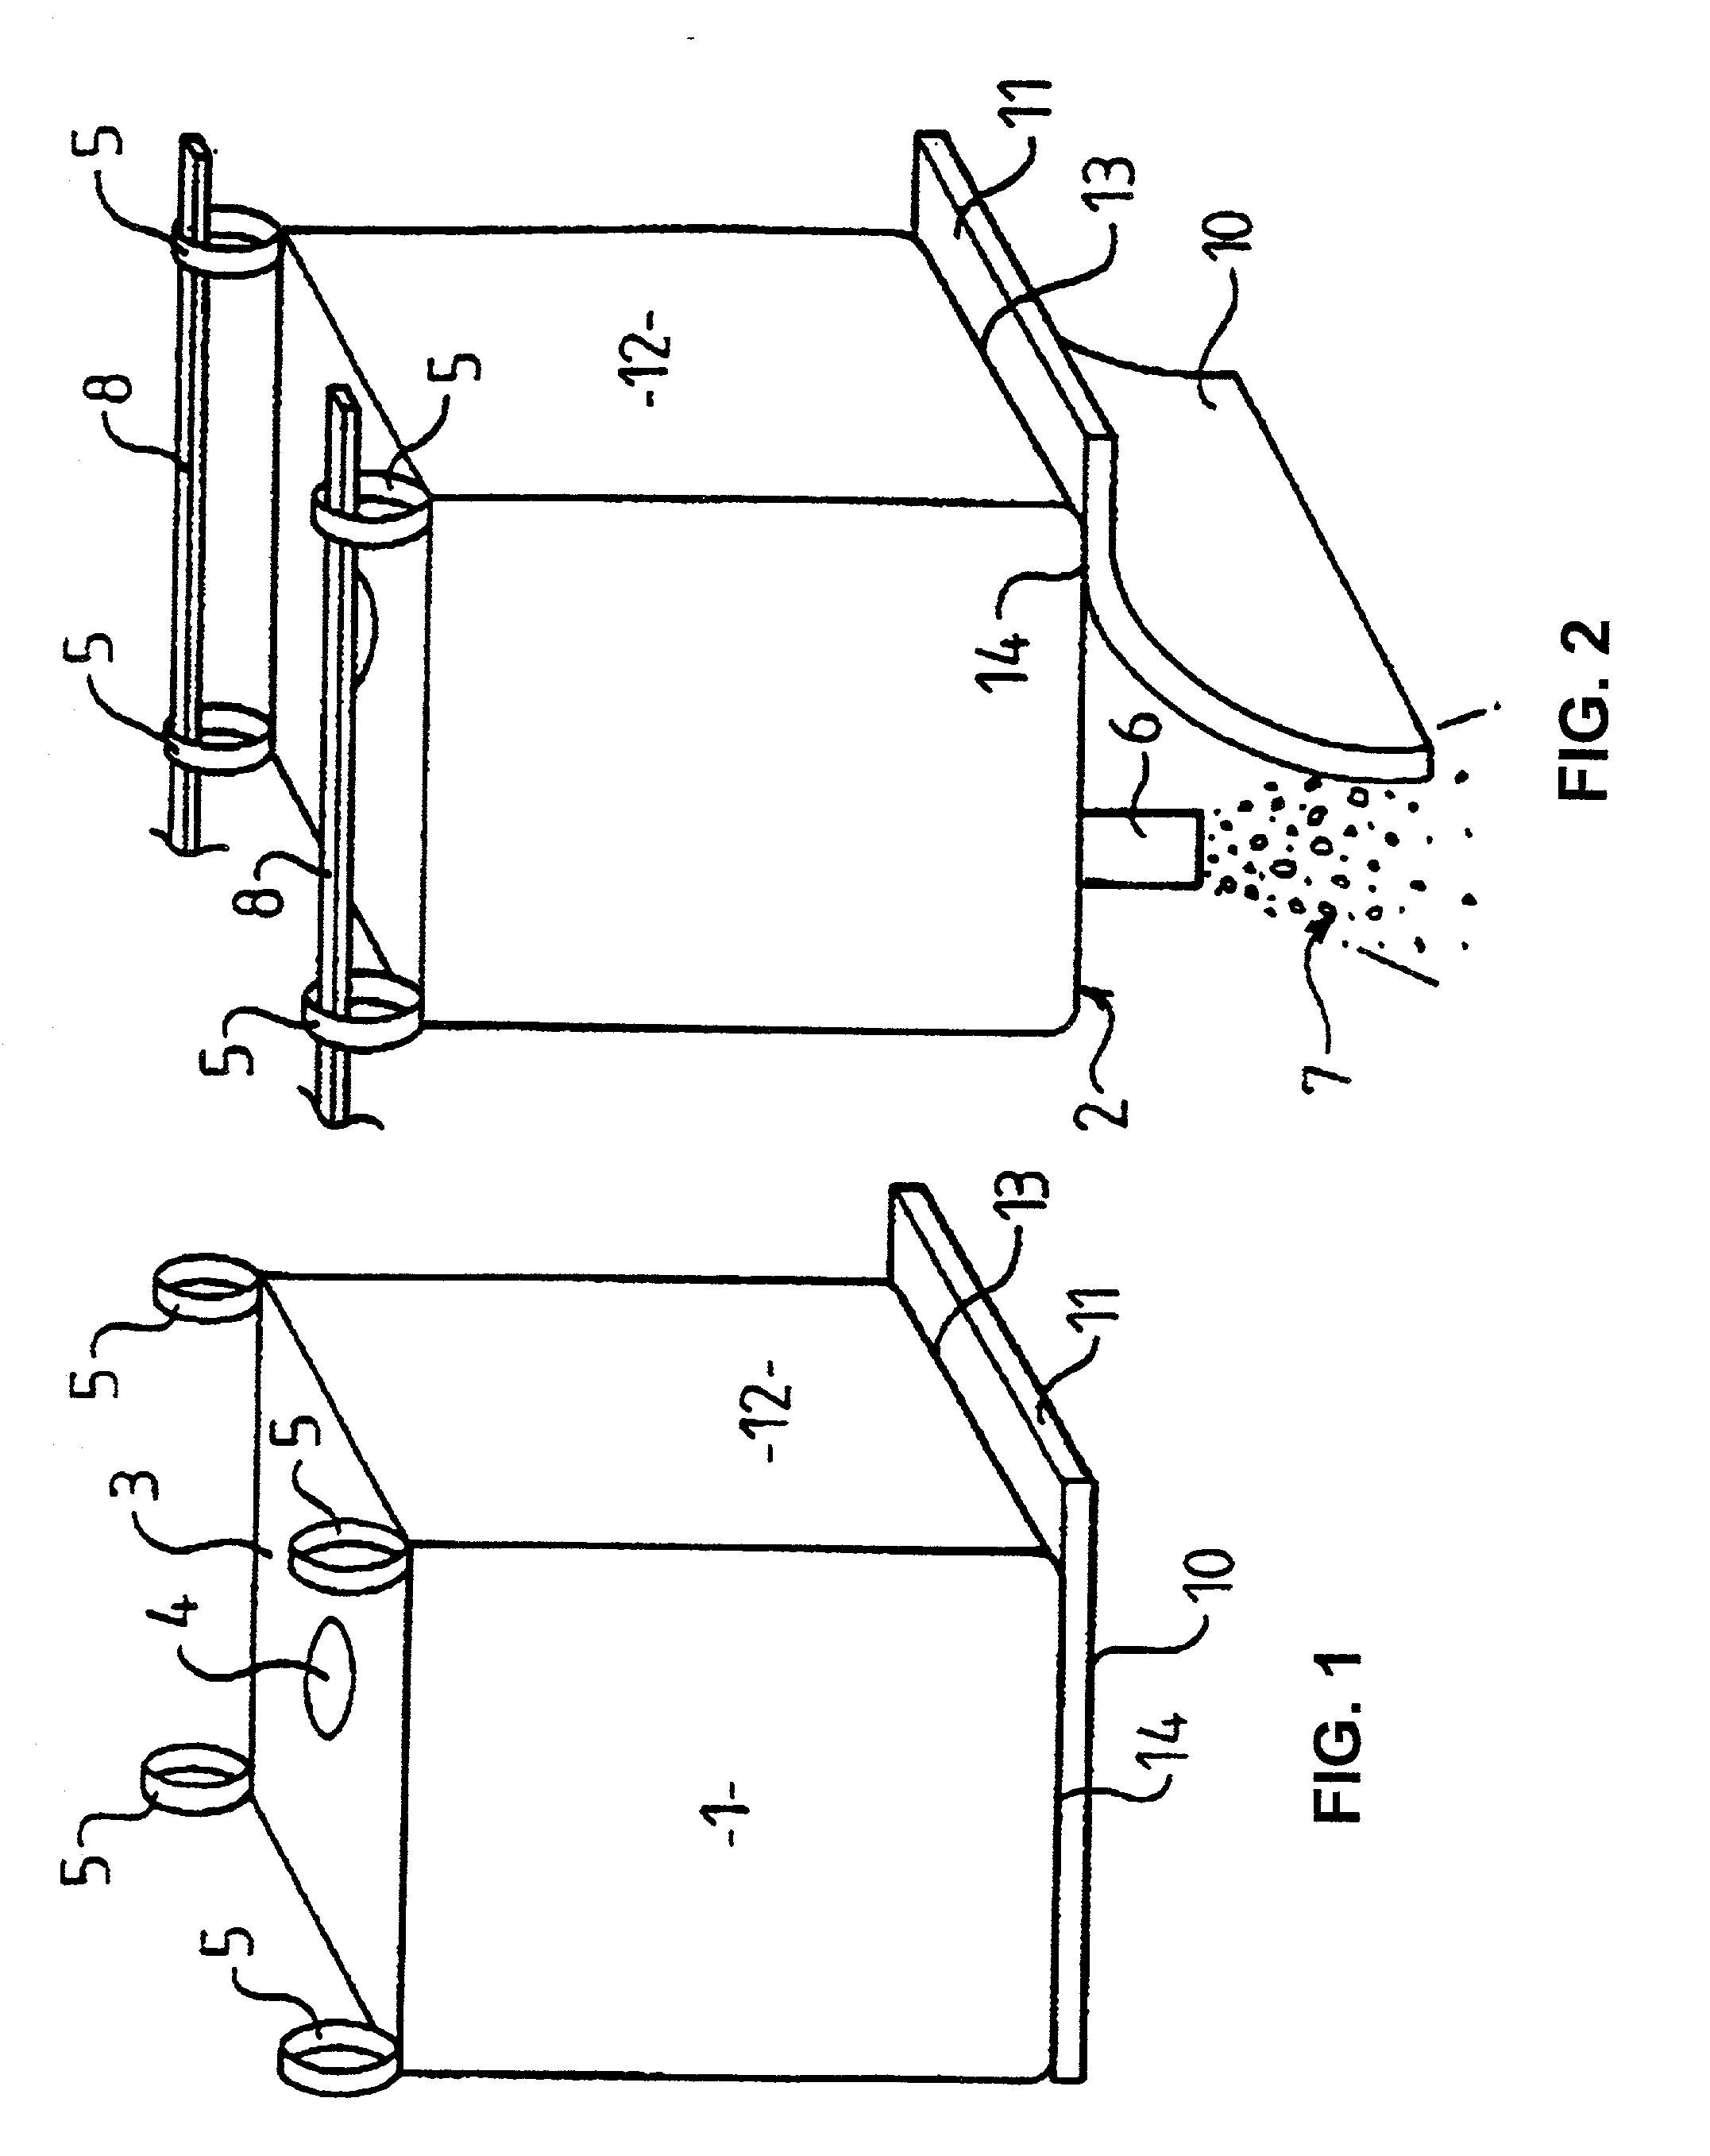 Contained with repositionable slip-sheet to cover outlet